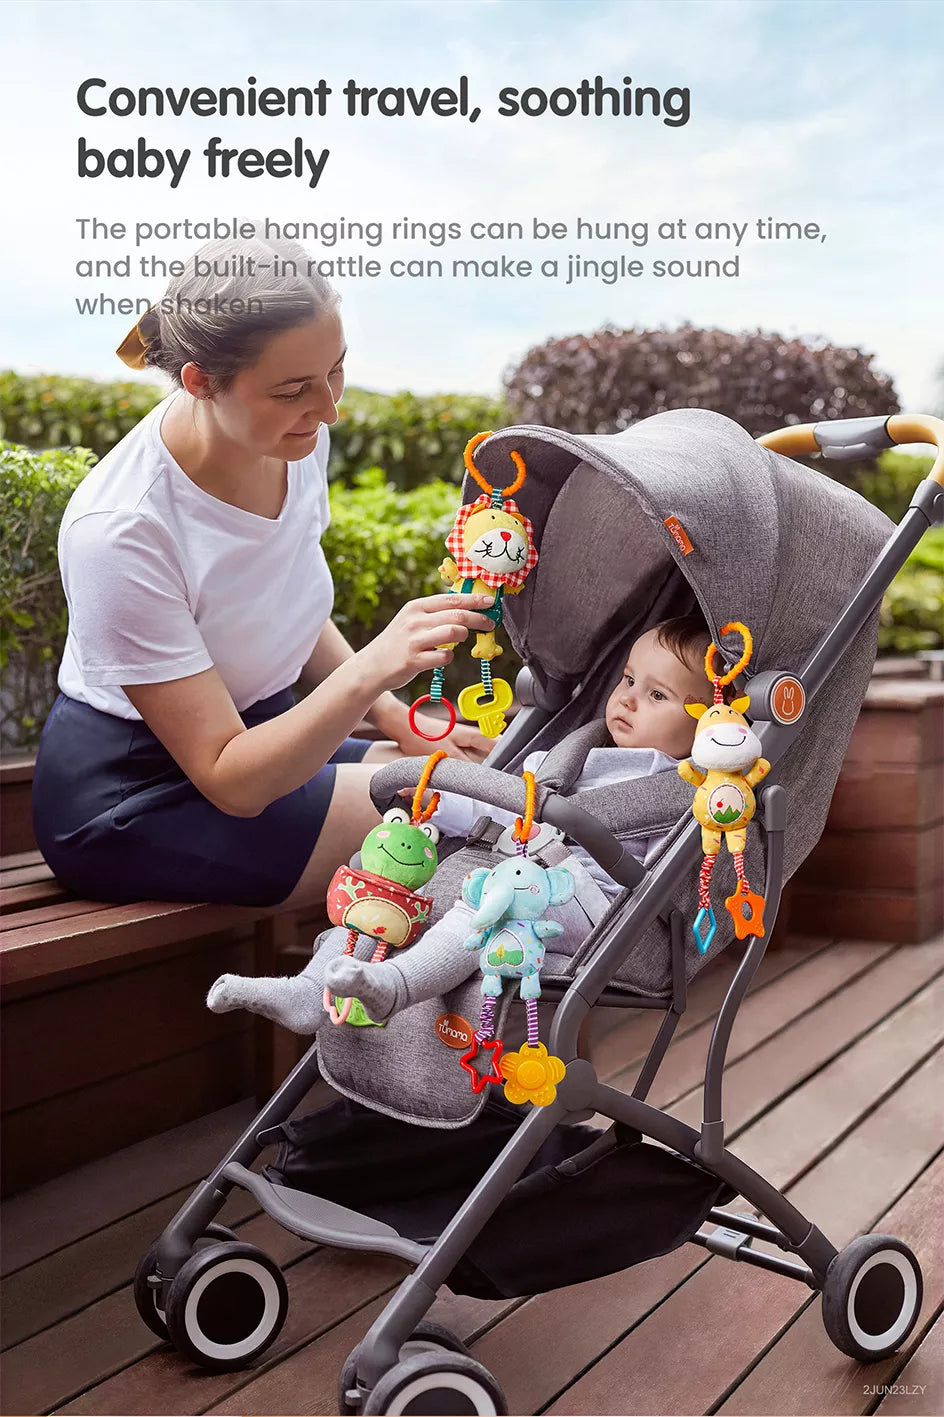 A mom pushing a stroller with a frog deer elephant lion toy hanging from it